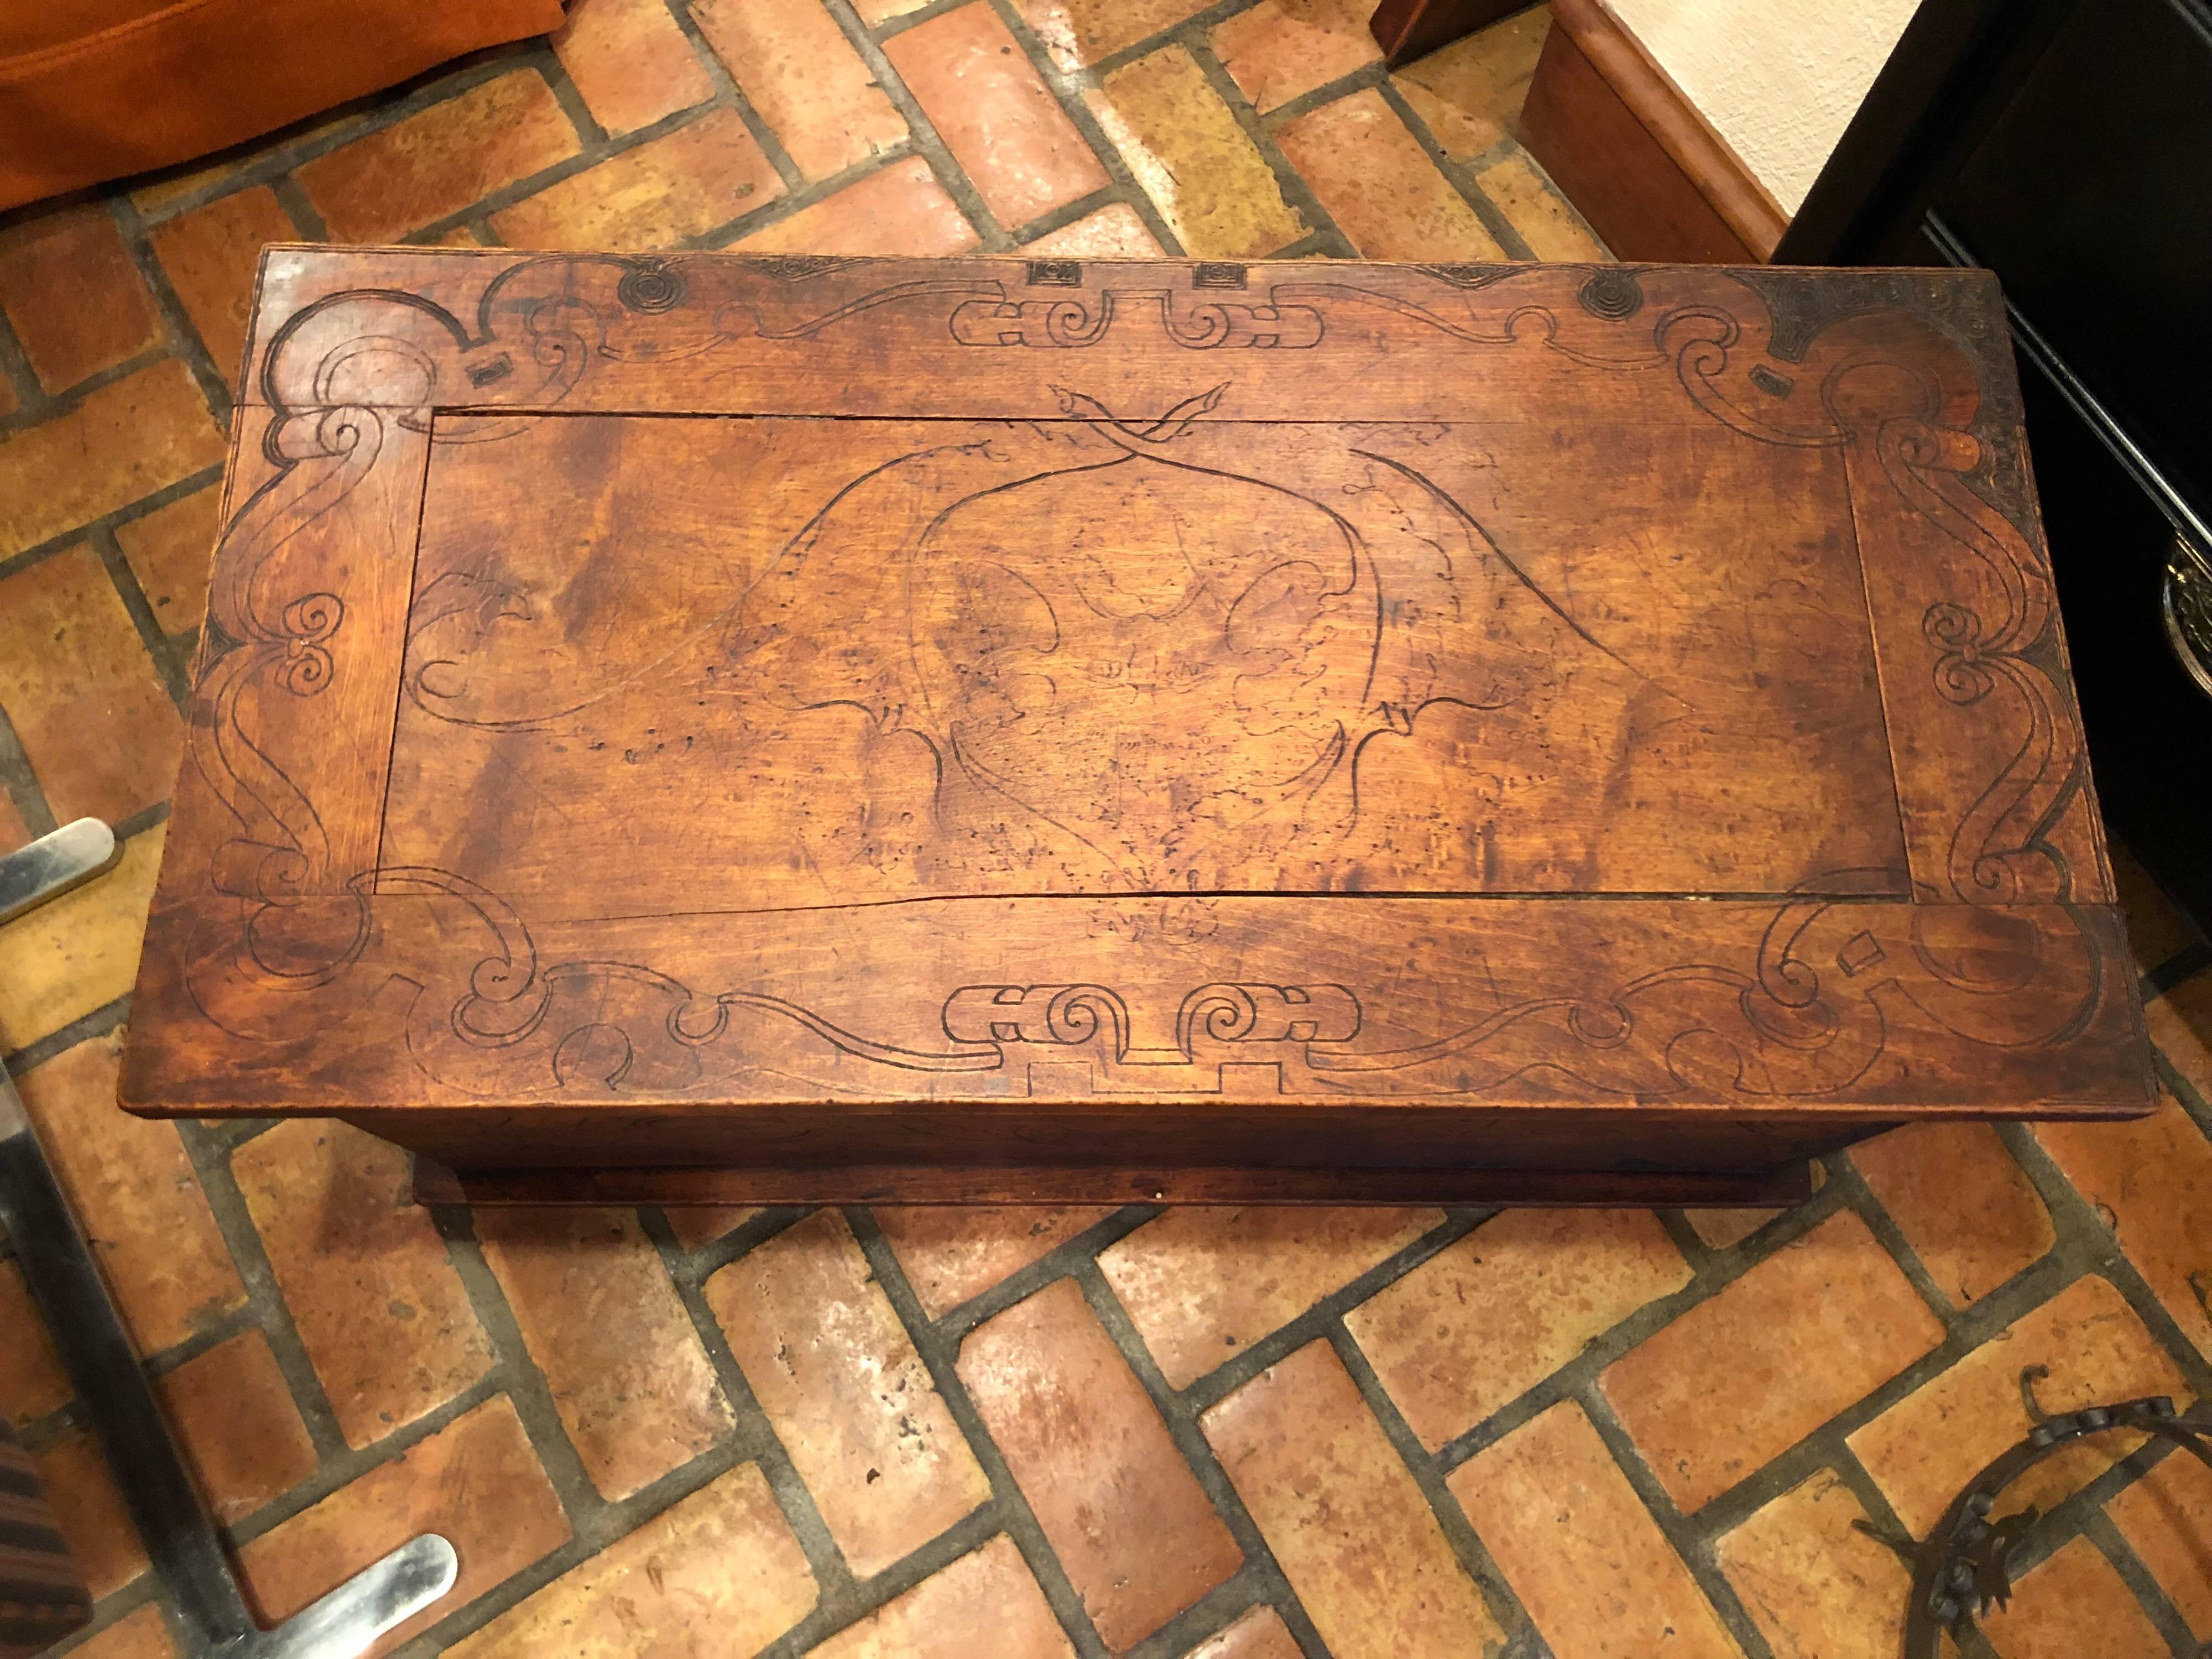 Wooden Folk Art pyrography trunk. Intricately burned and carved back and sides make up this beauty. The front has no decoration but the hinged top could be switched to fix that. All in all a gorgeous unique storage piece for either blankets or even